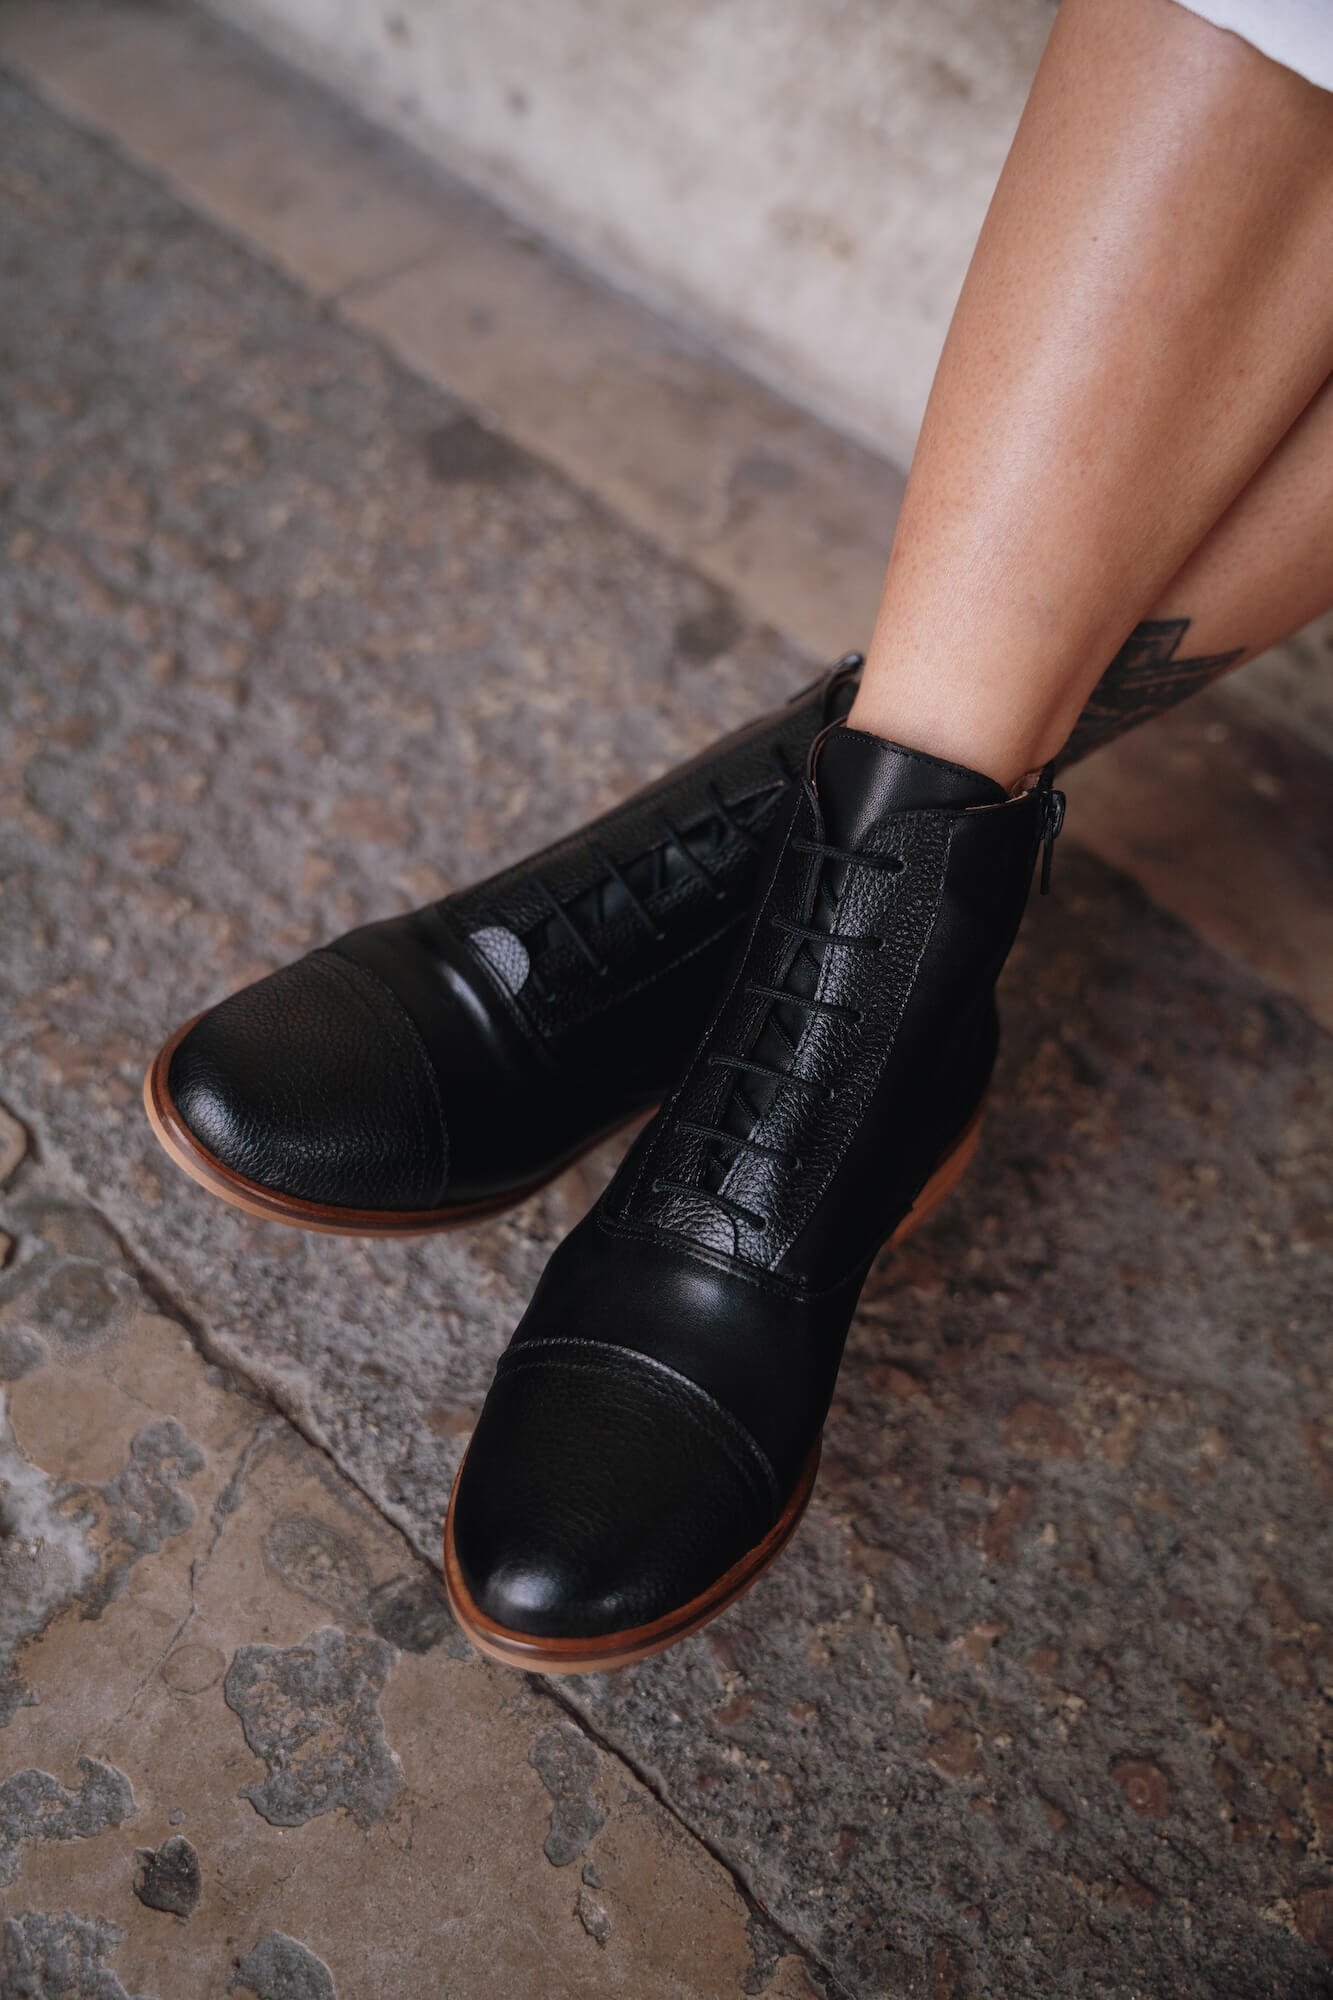 Chaussures Swing Bottines Noires Cuir 4